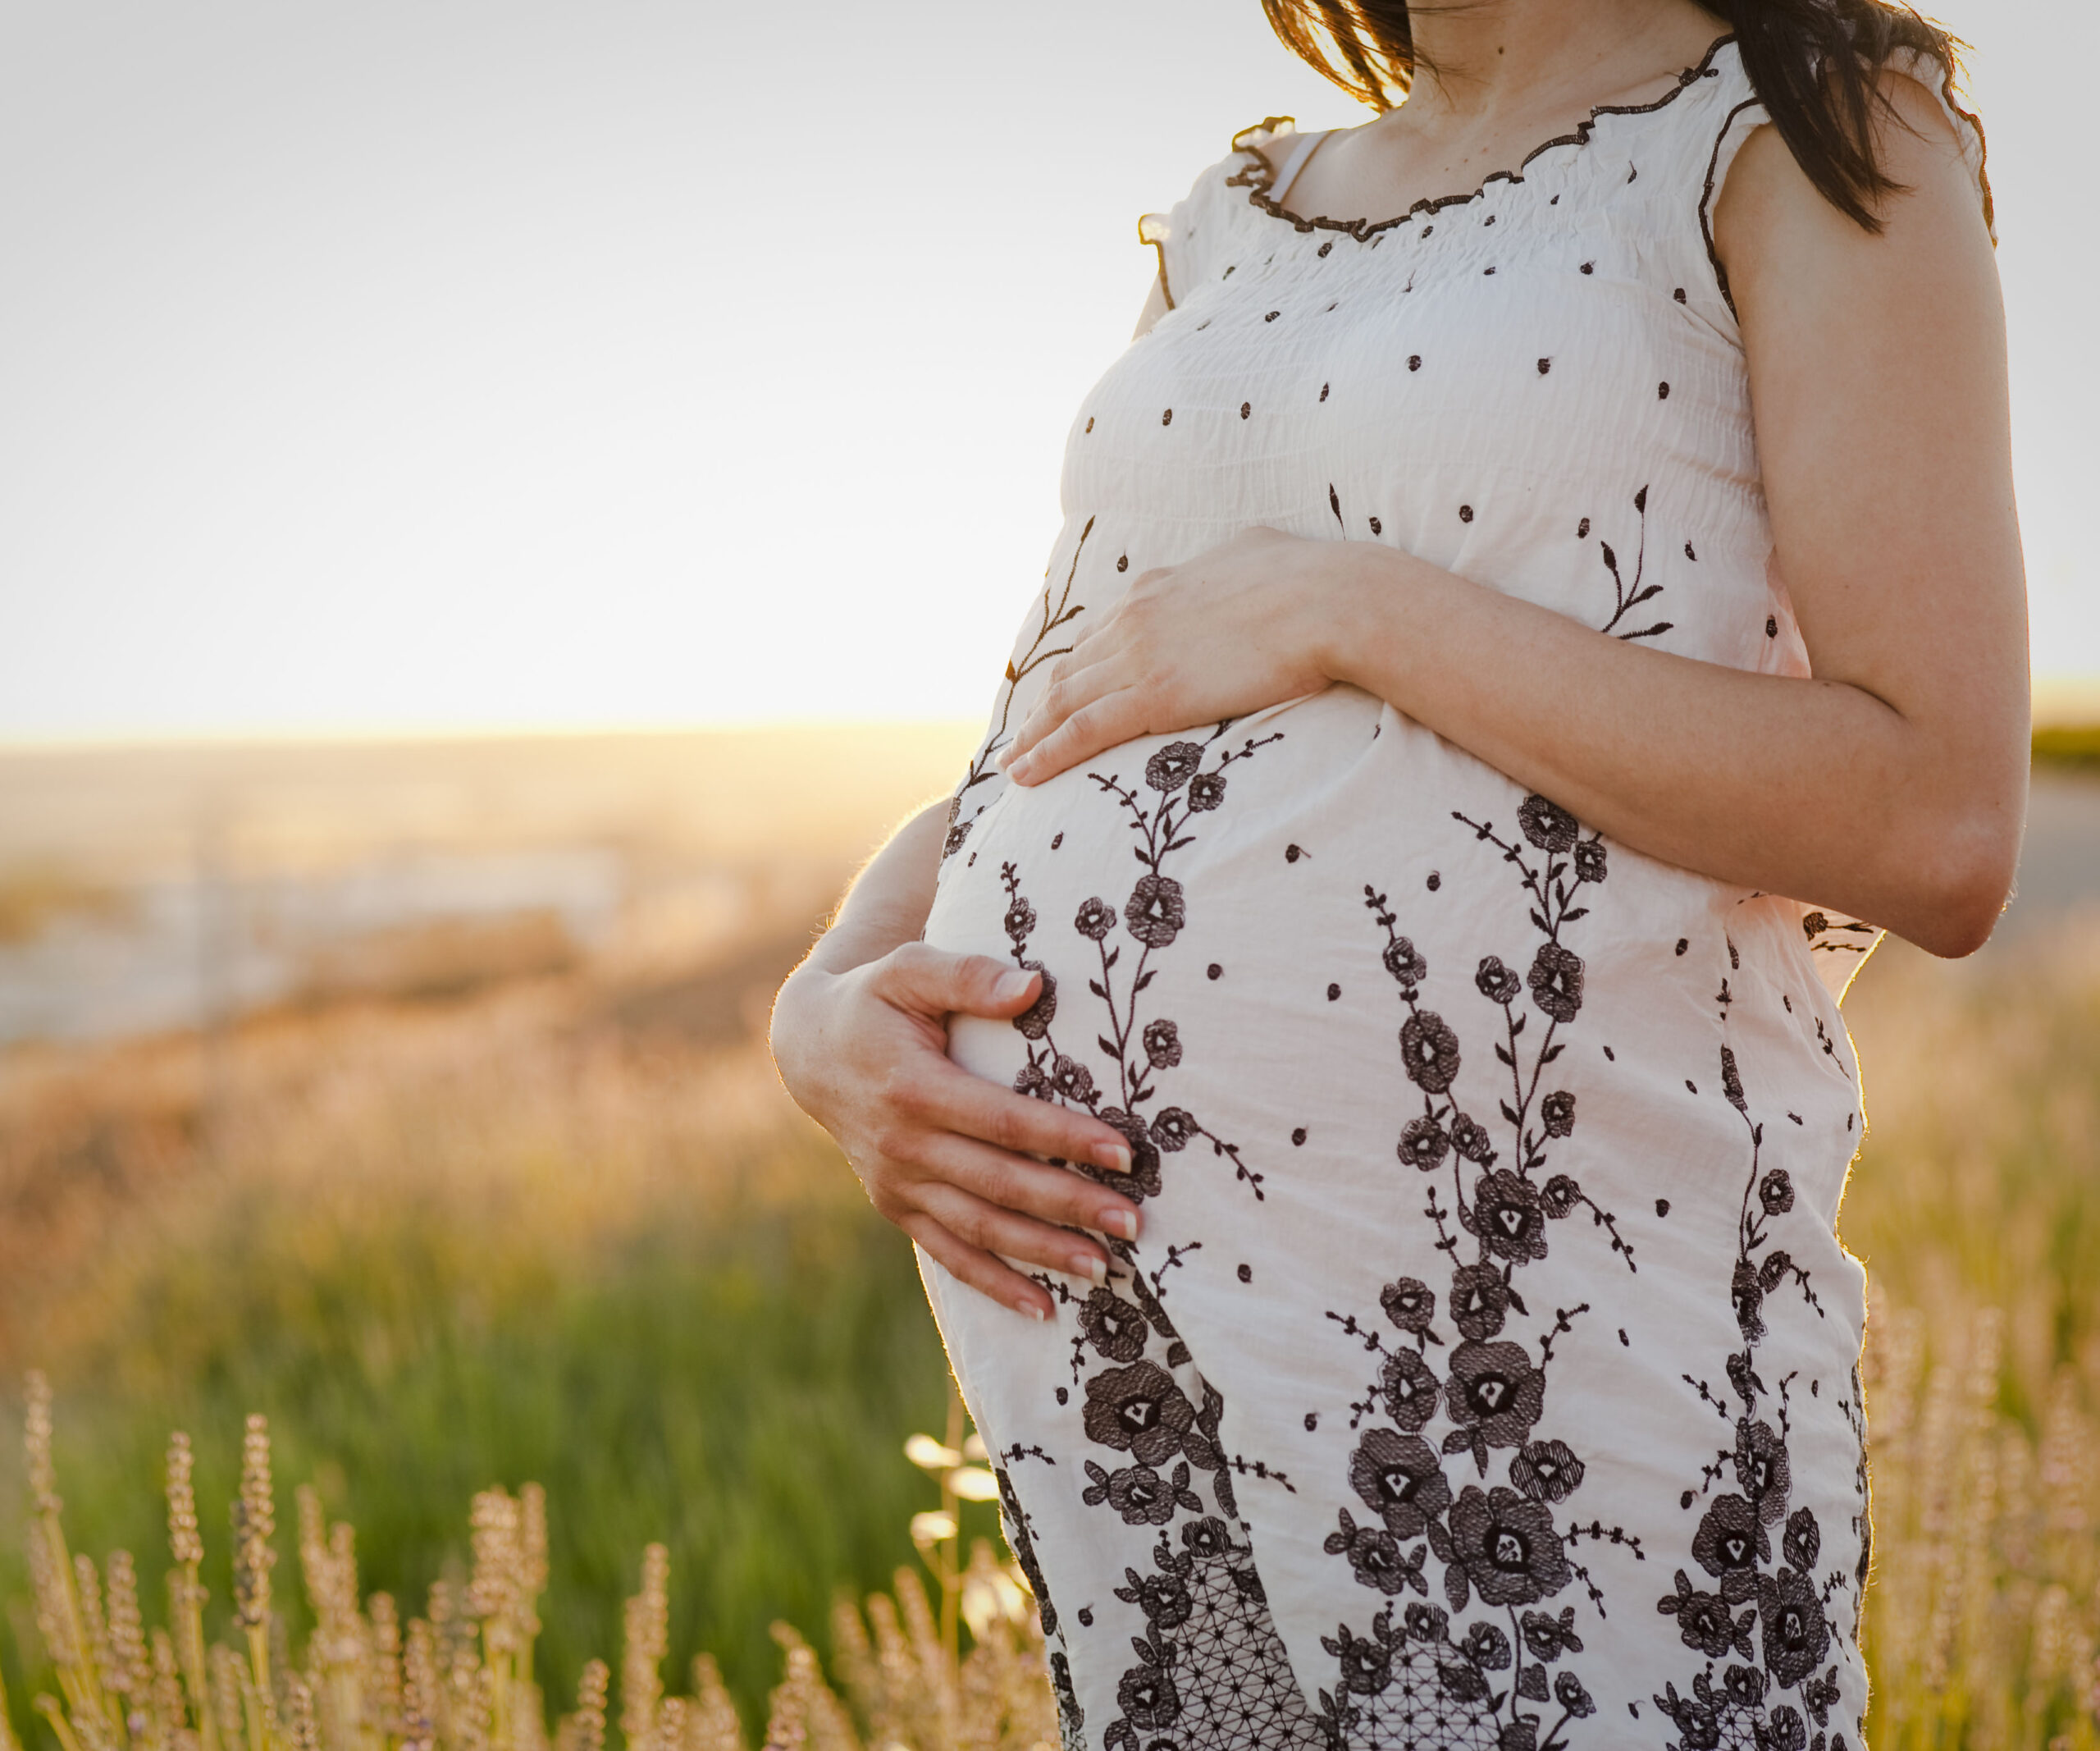 Can taking antidepressants during pregnancy affect the risk of autism?